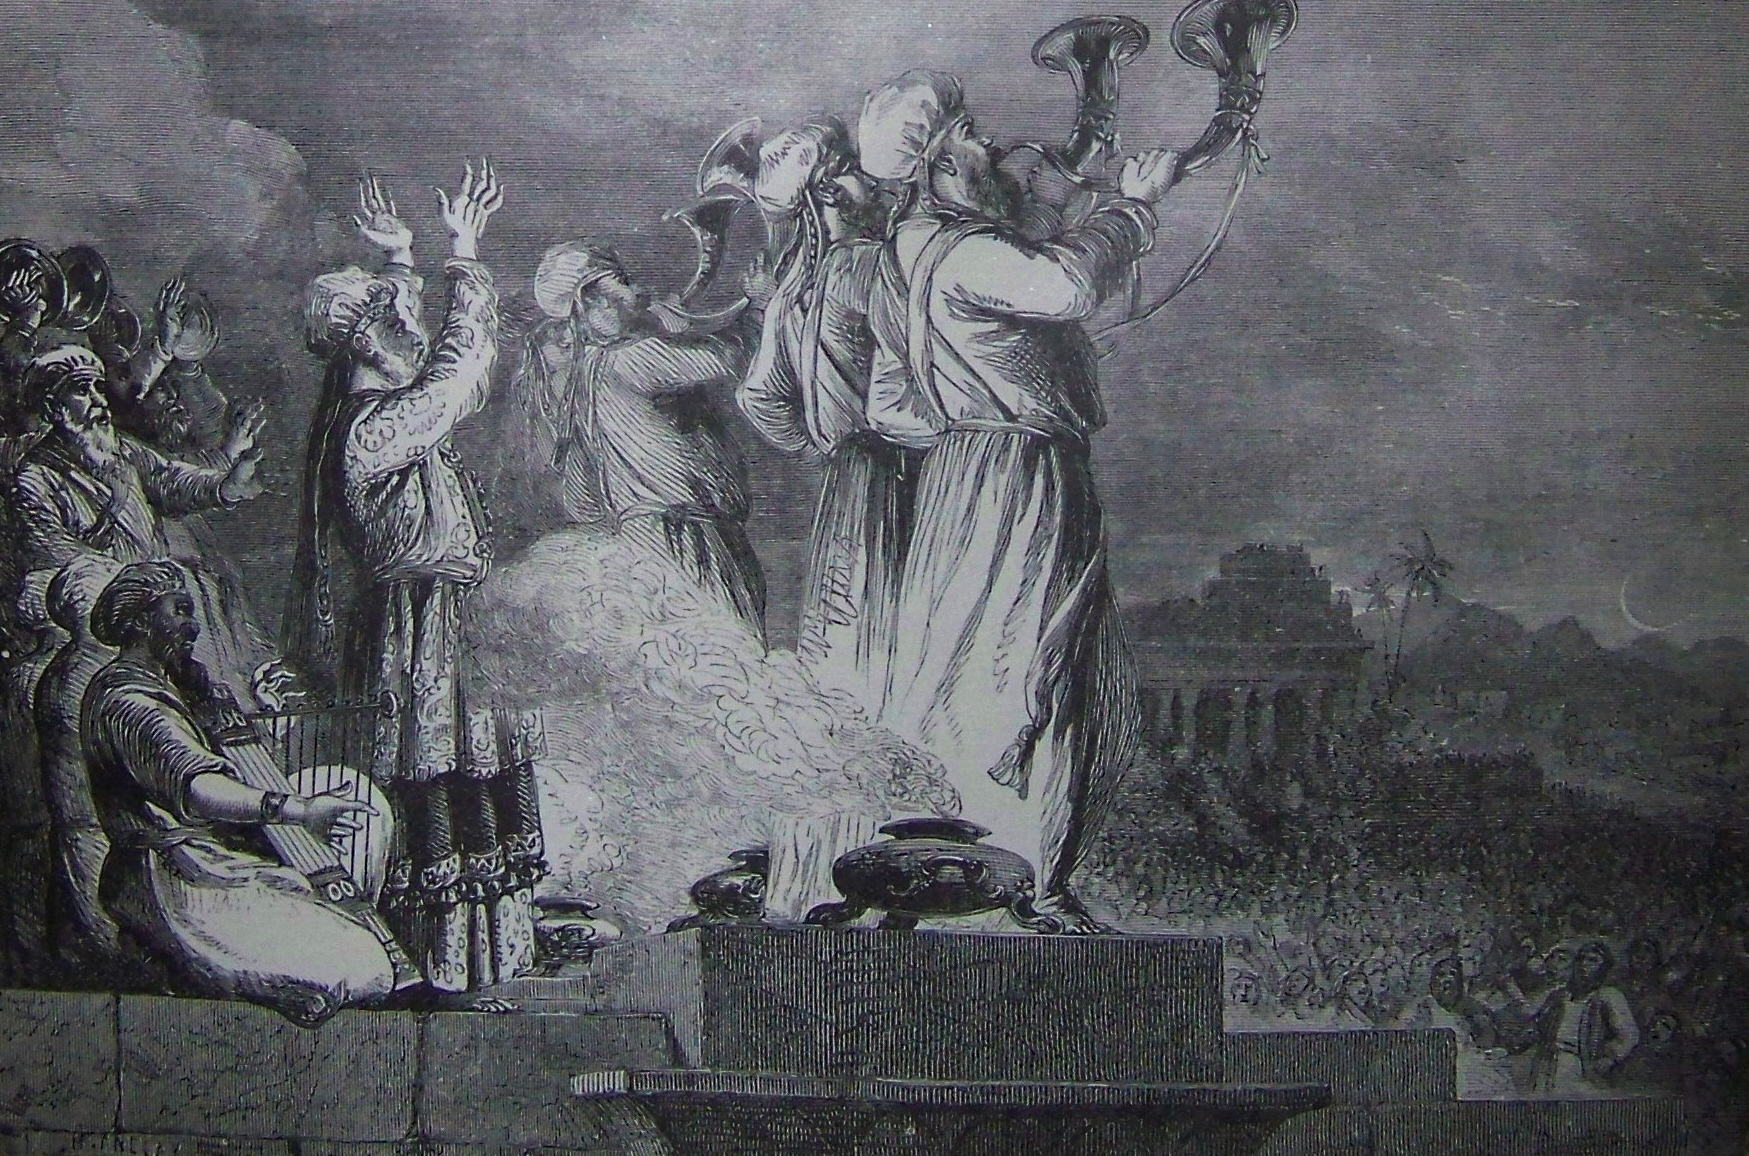 Blowing the Trumpet at the Feast of the New Moon (illustration from the 1890 Holman Bible)